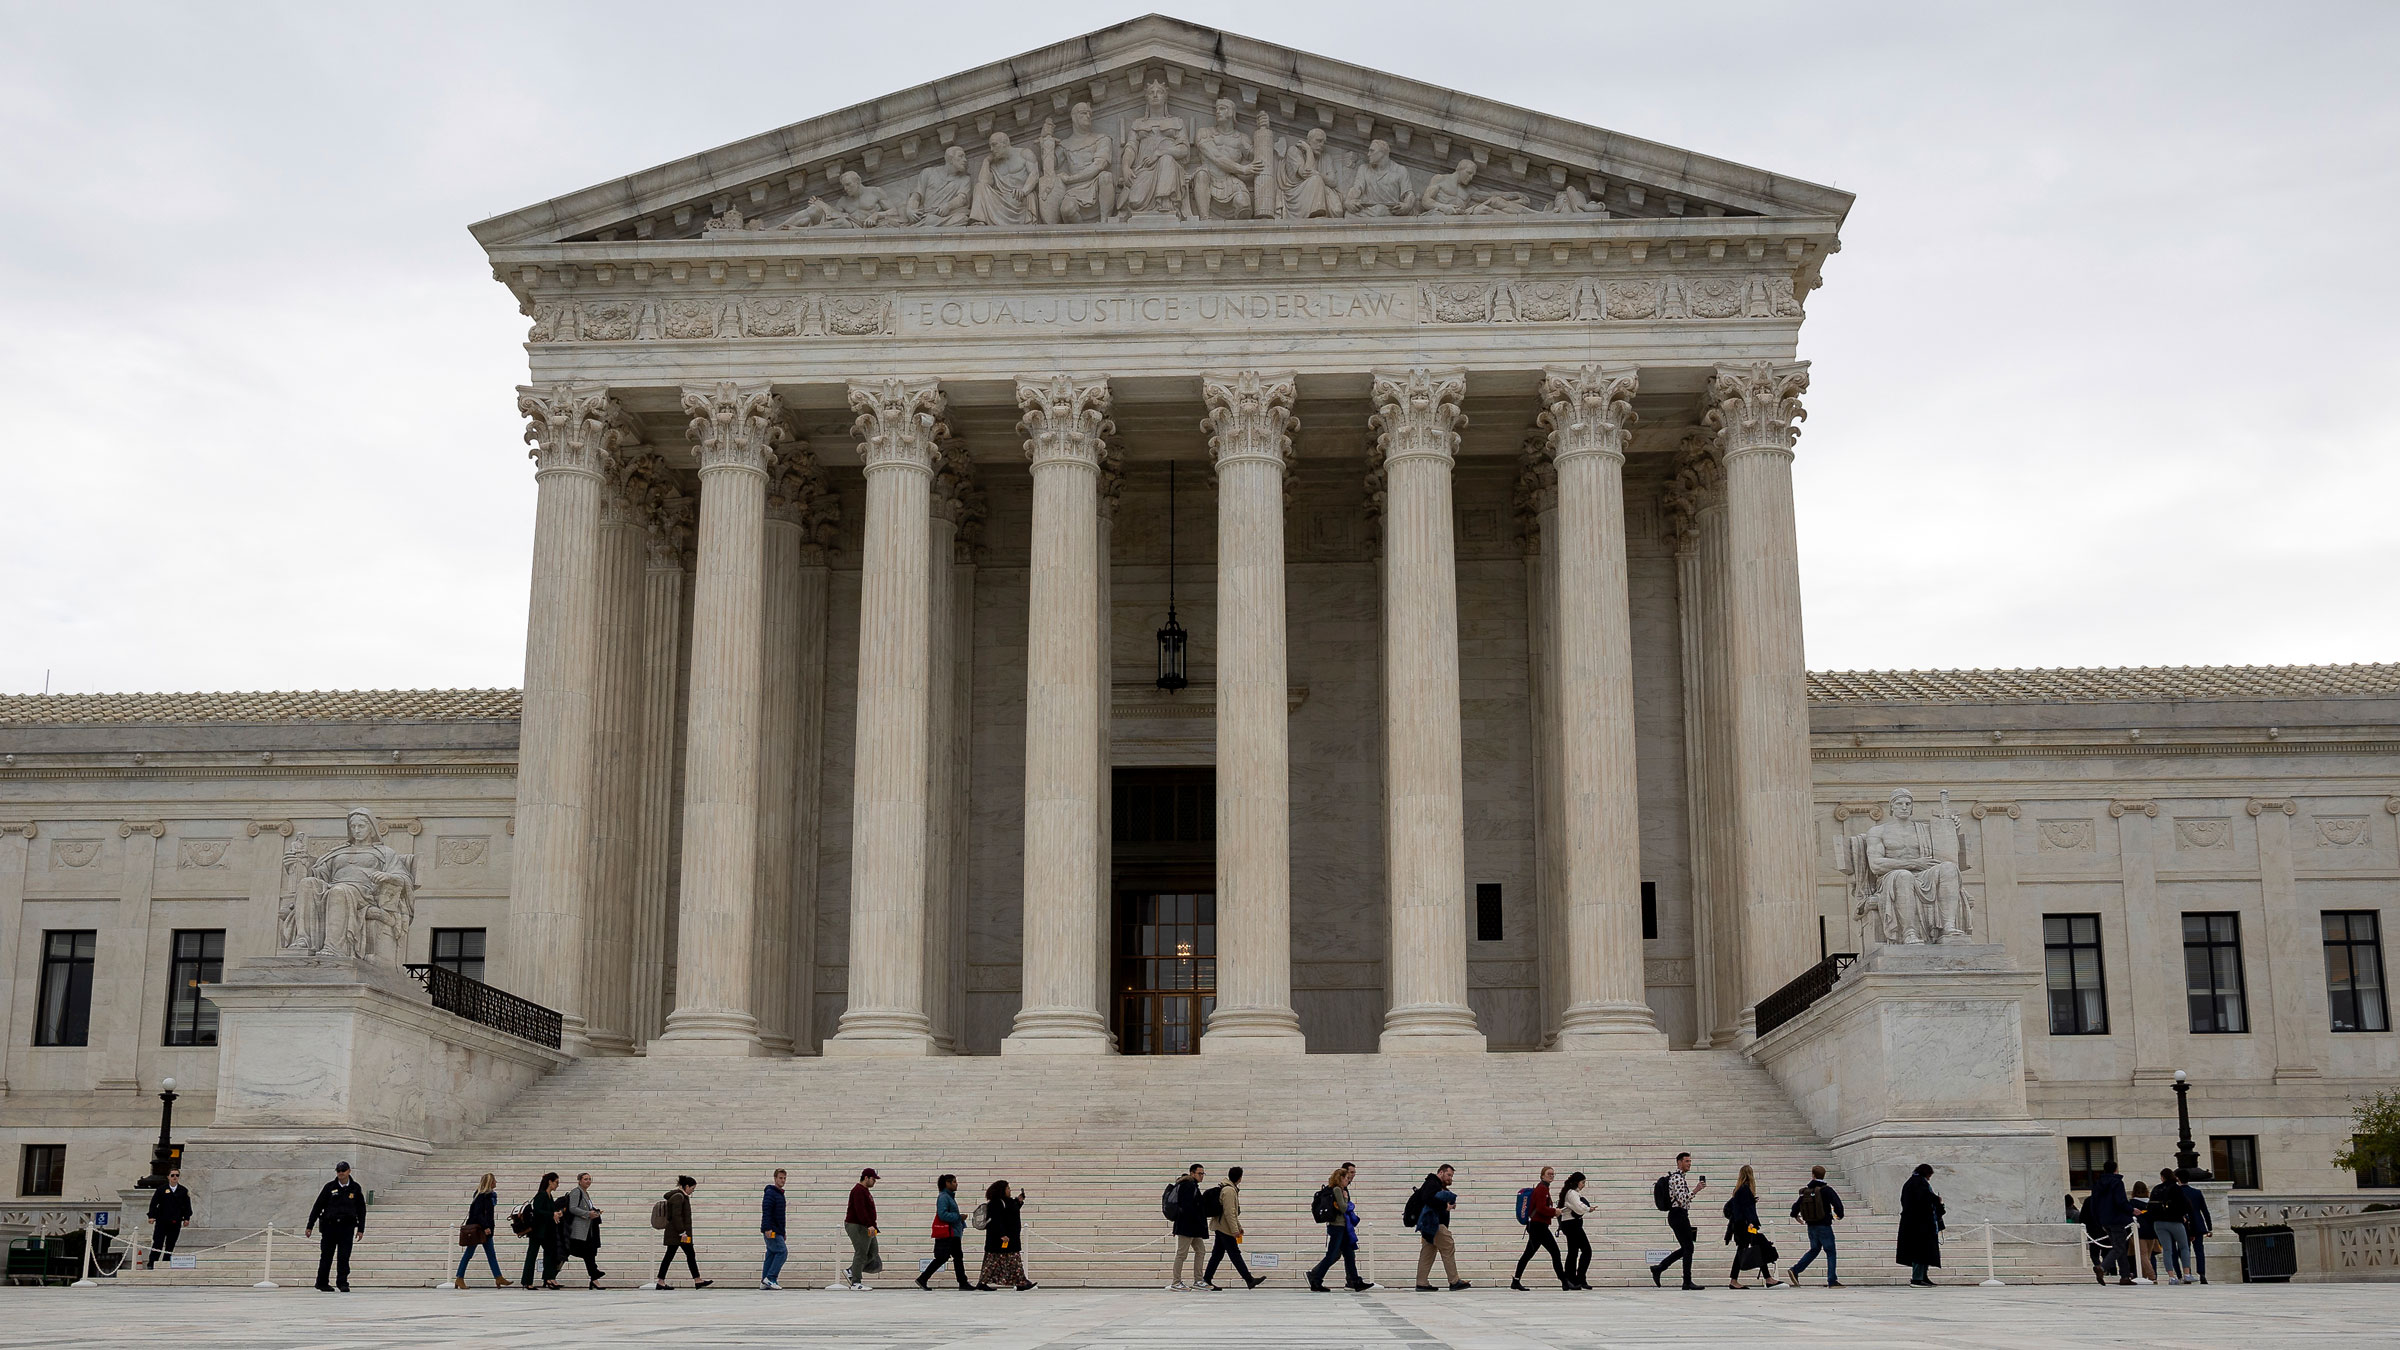 On Monday, the public entered the Supreme Court for oral arguments.